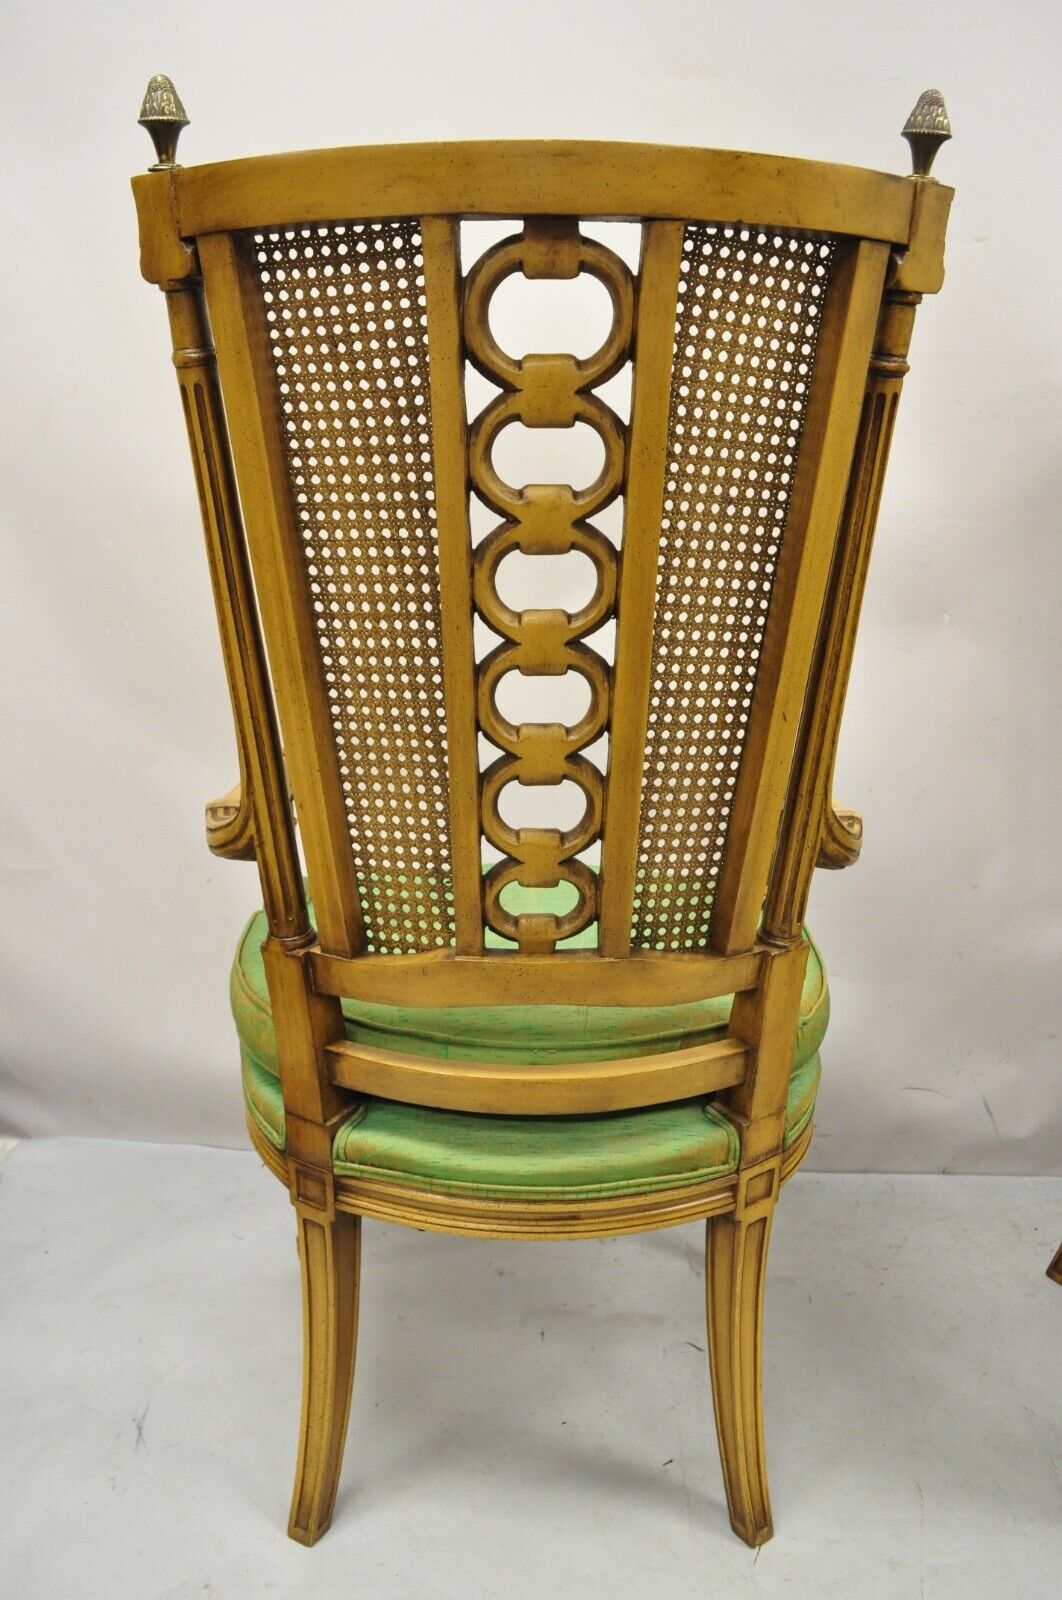 Vintage French Hollywood Regency Tall Cane Back Carved Link Chairs - a Pair